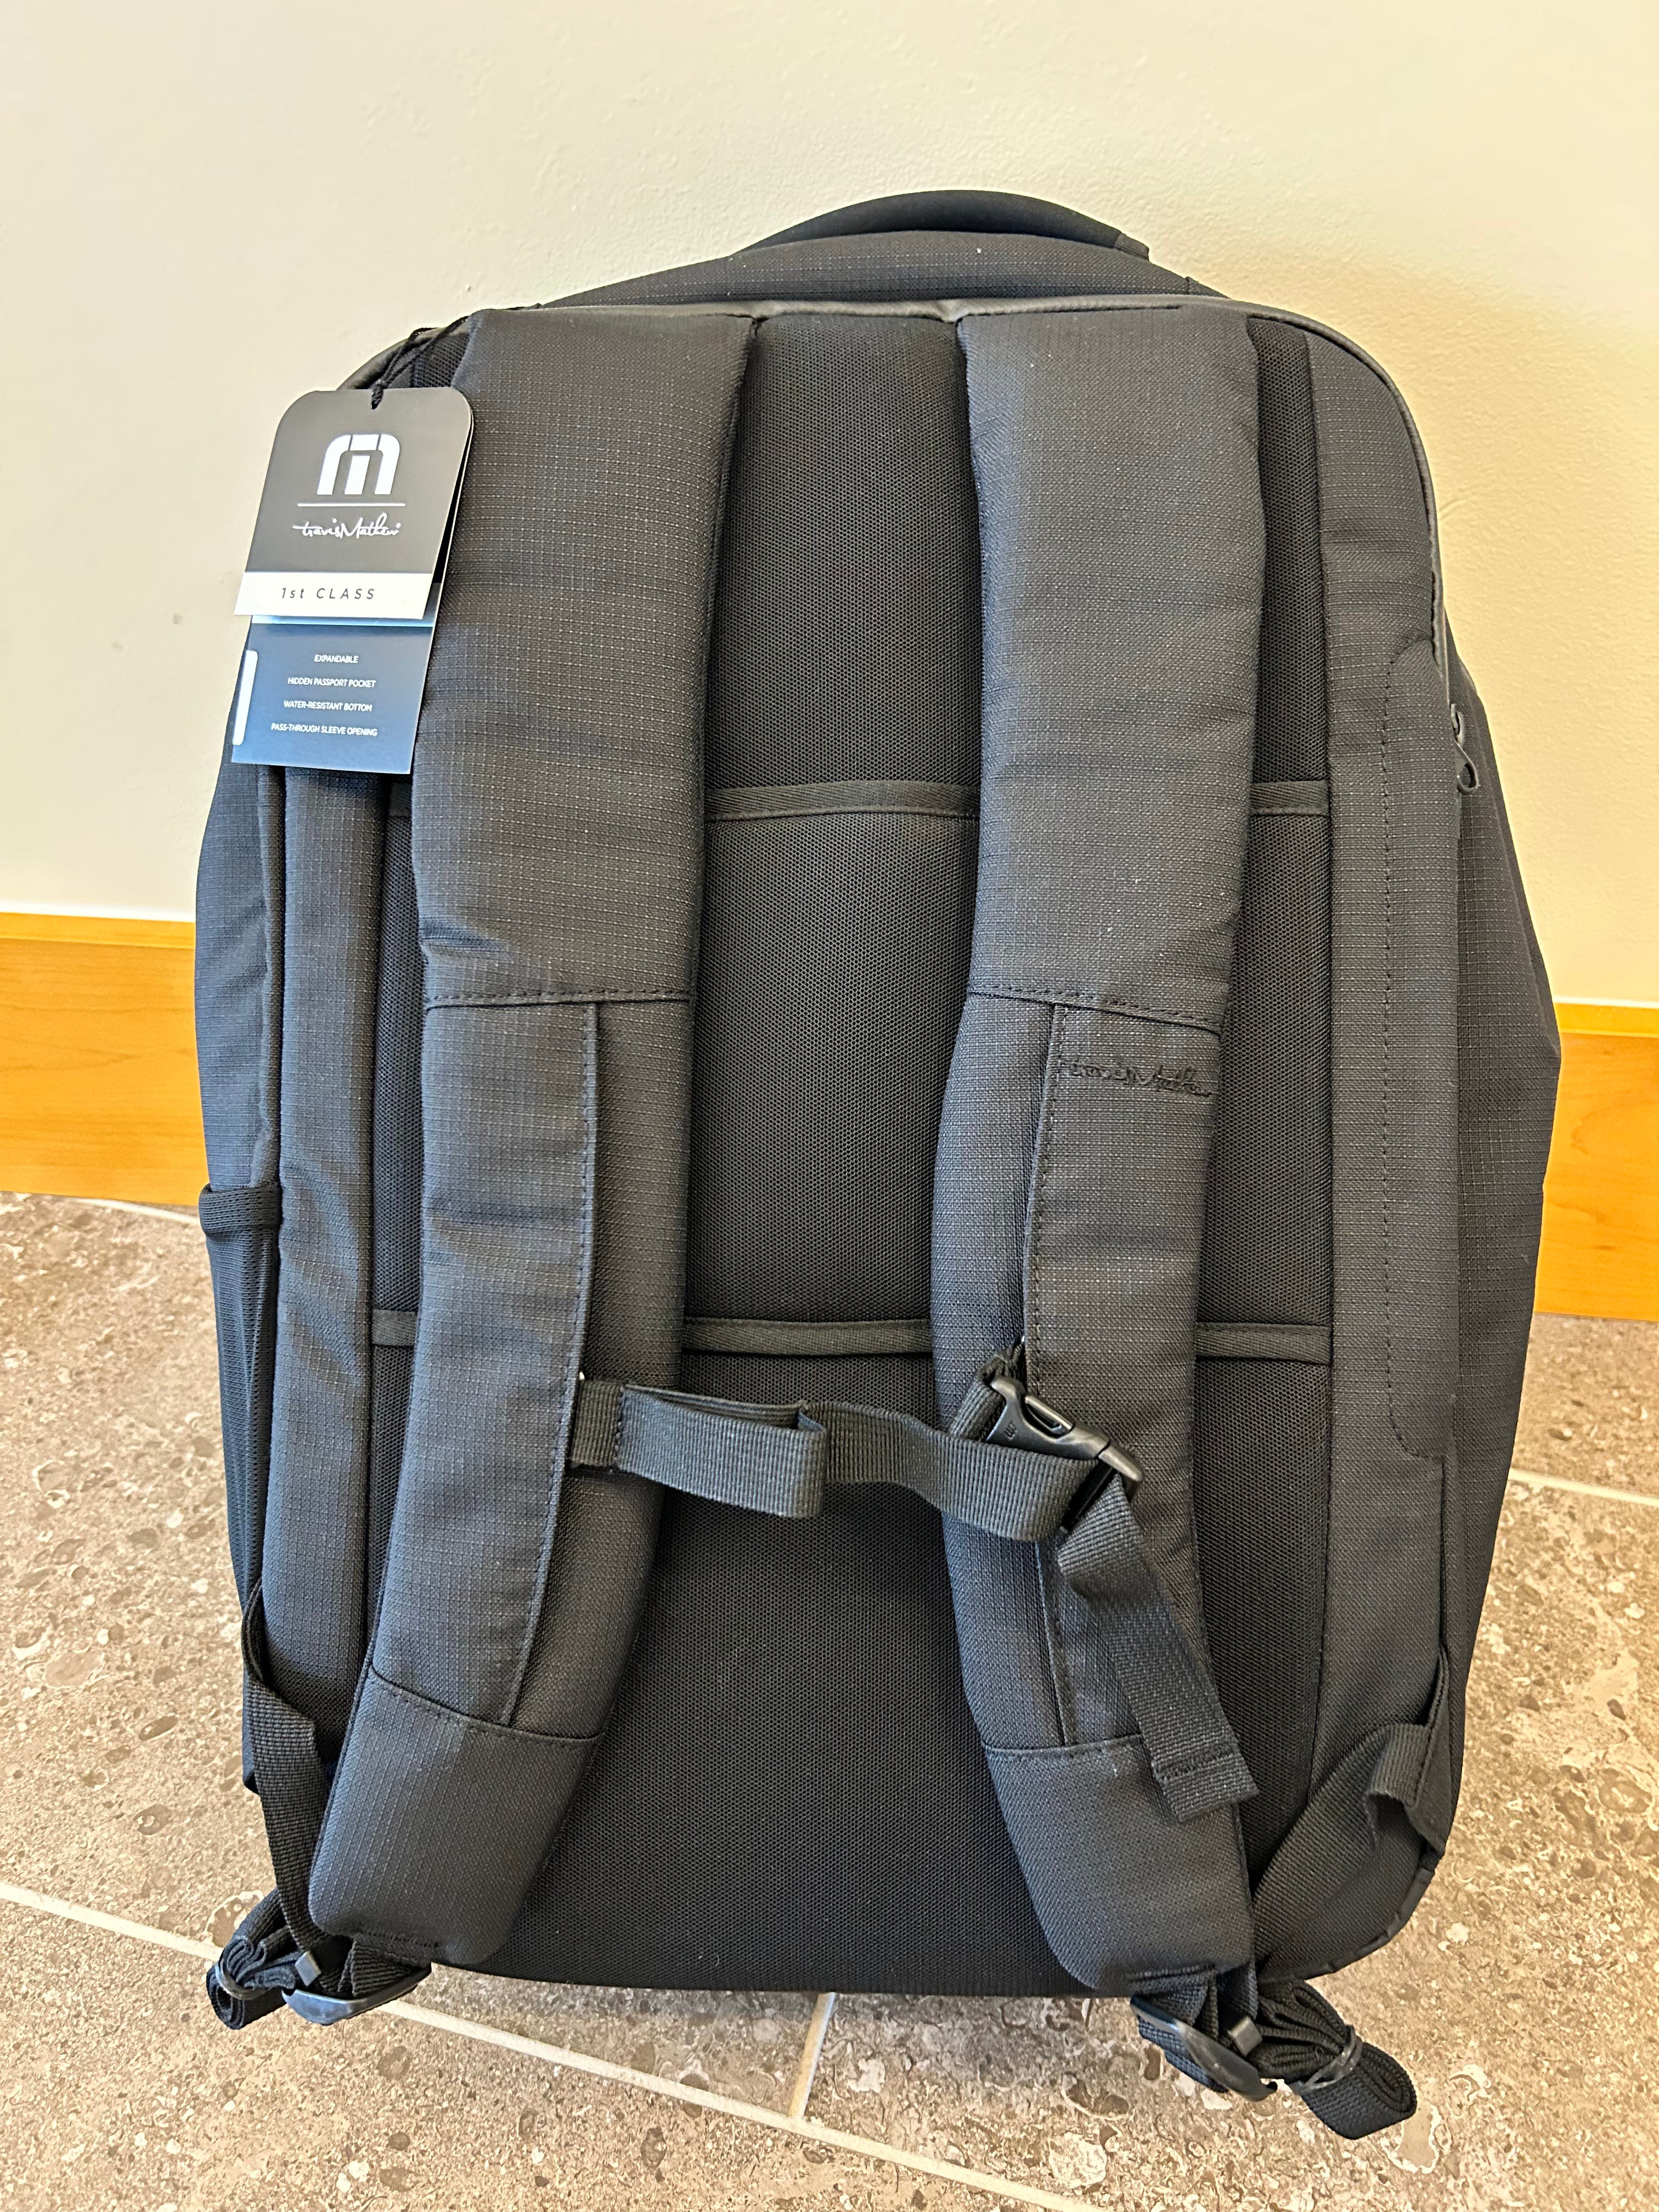 Backpack-TM-23/24-1st Class